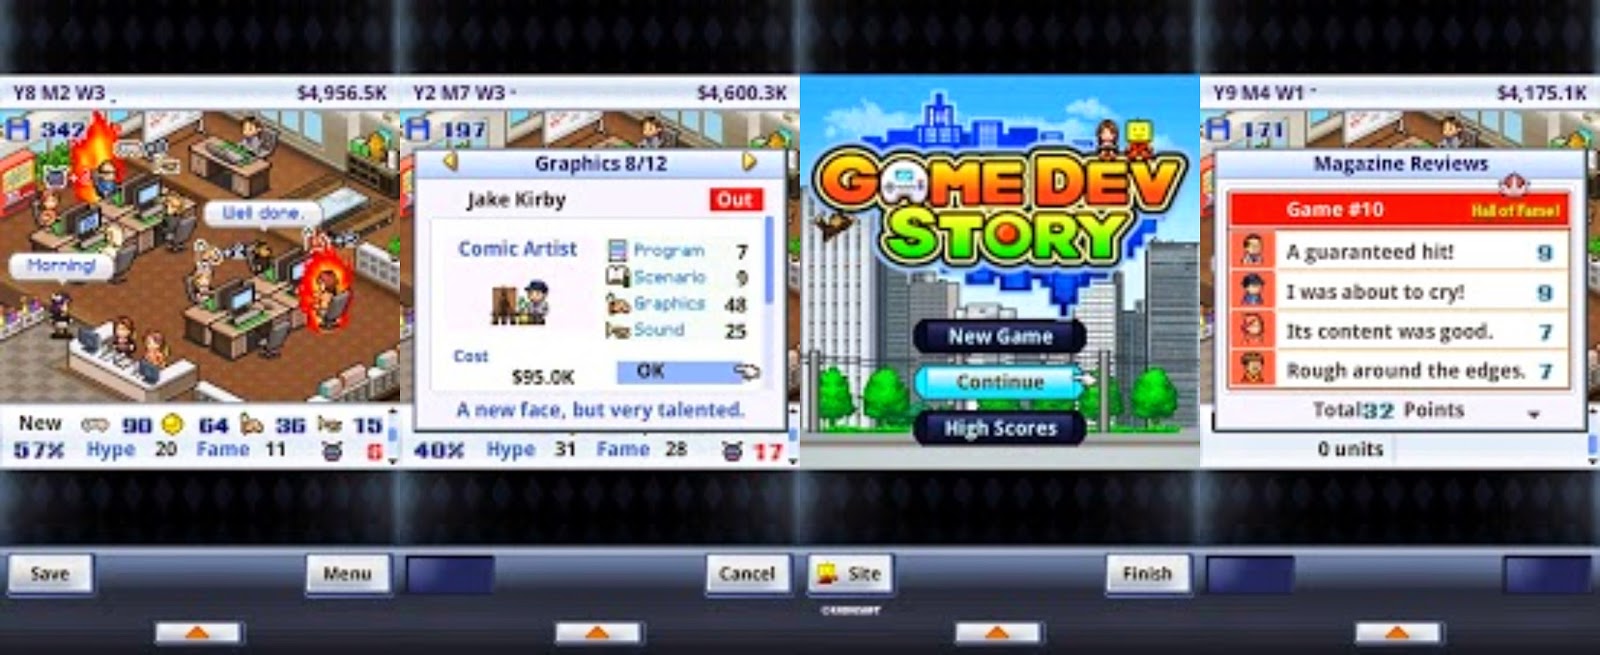 Game Dev Story v1.1.4 Apk Free For Android